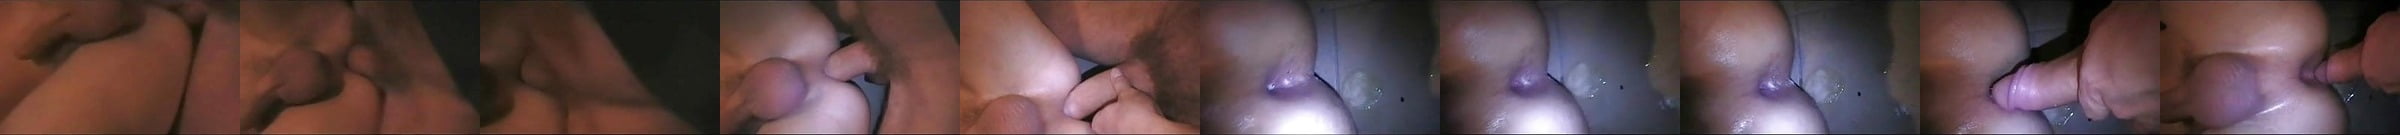 Takes The Condom Off Free Gay Porn Video Bb Xhamster